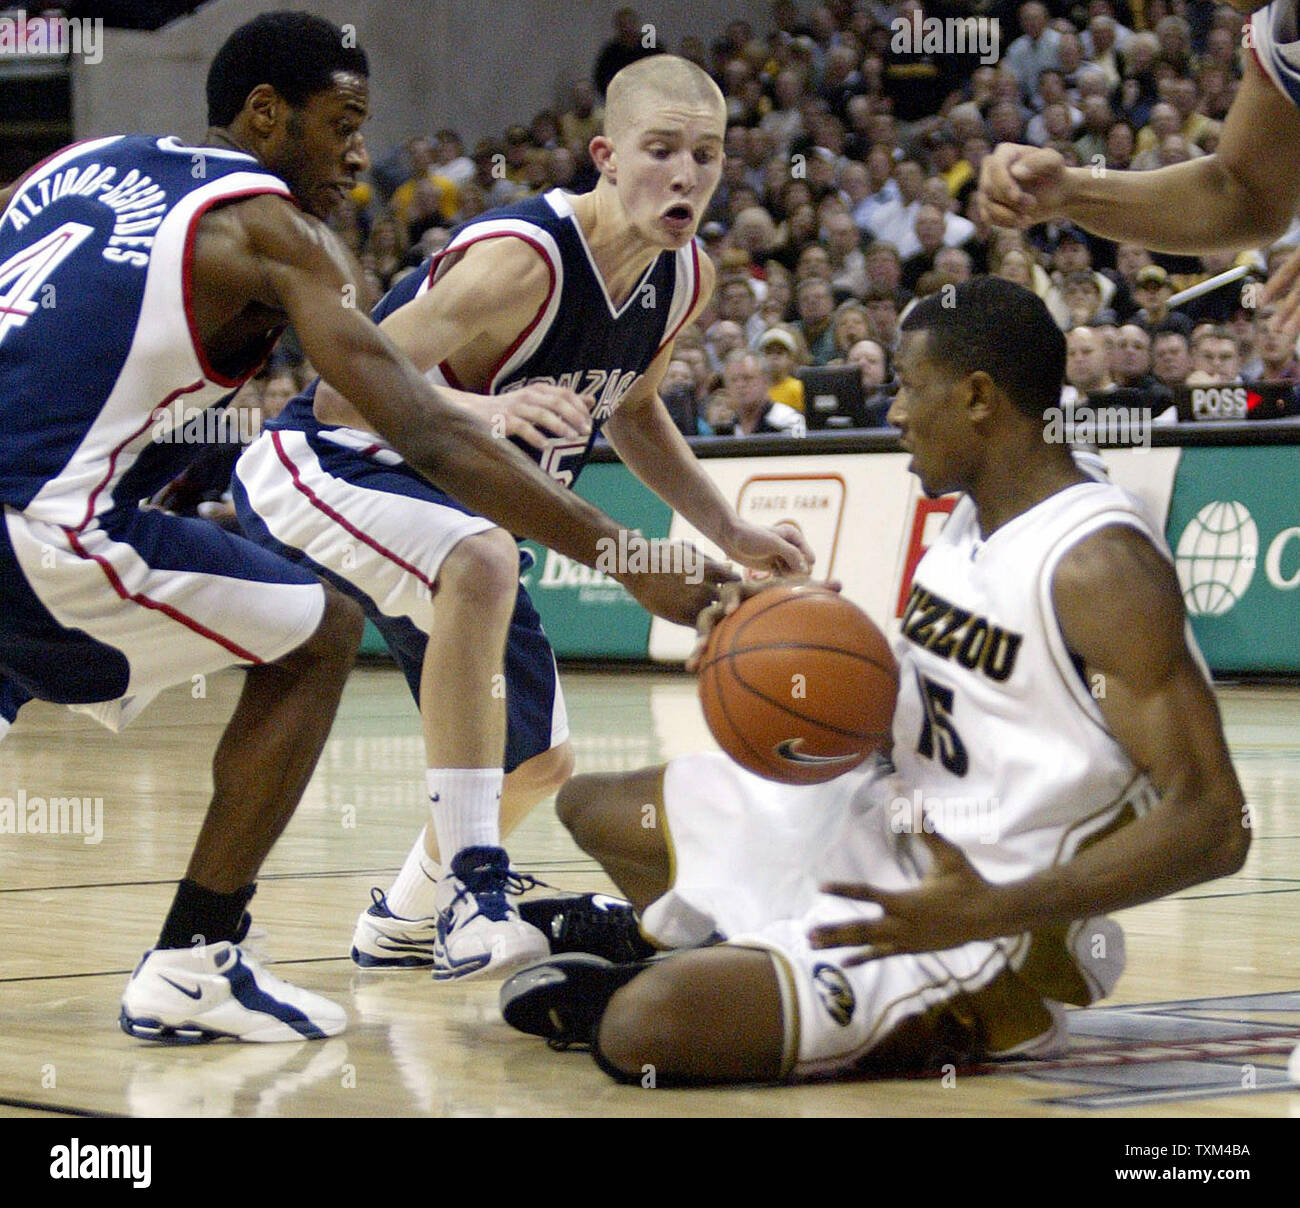 Missouri Tigers Marshall Brown (R) goes to the floor for a loose ball as Gonzaga Bulldogs'  P. M. Altidor-Cespedes (L) and Dereck Raivio also give chase in the second half at the Mizzou Arena in Columbia, MO on December 30, 2004. (UPI Photo/Bill Greenblatt) Stock Photo